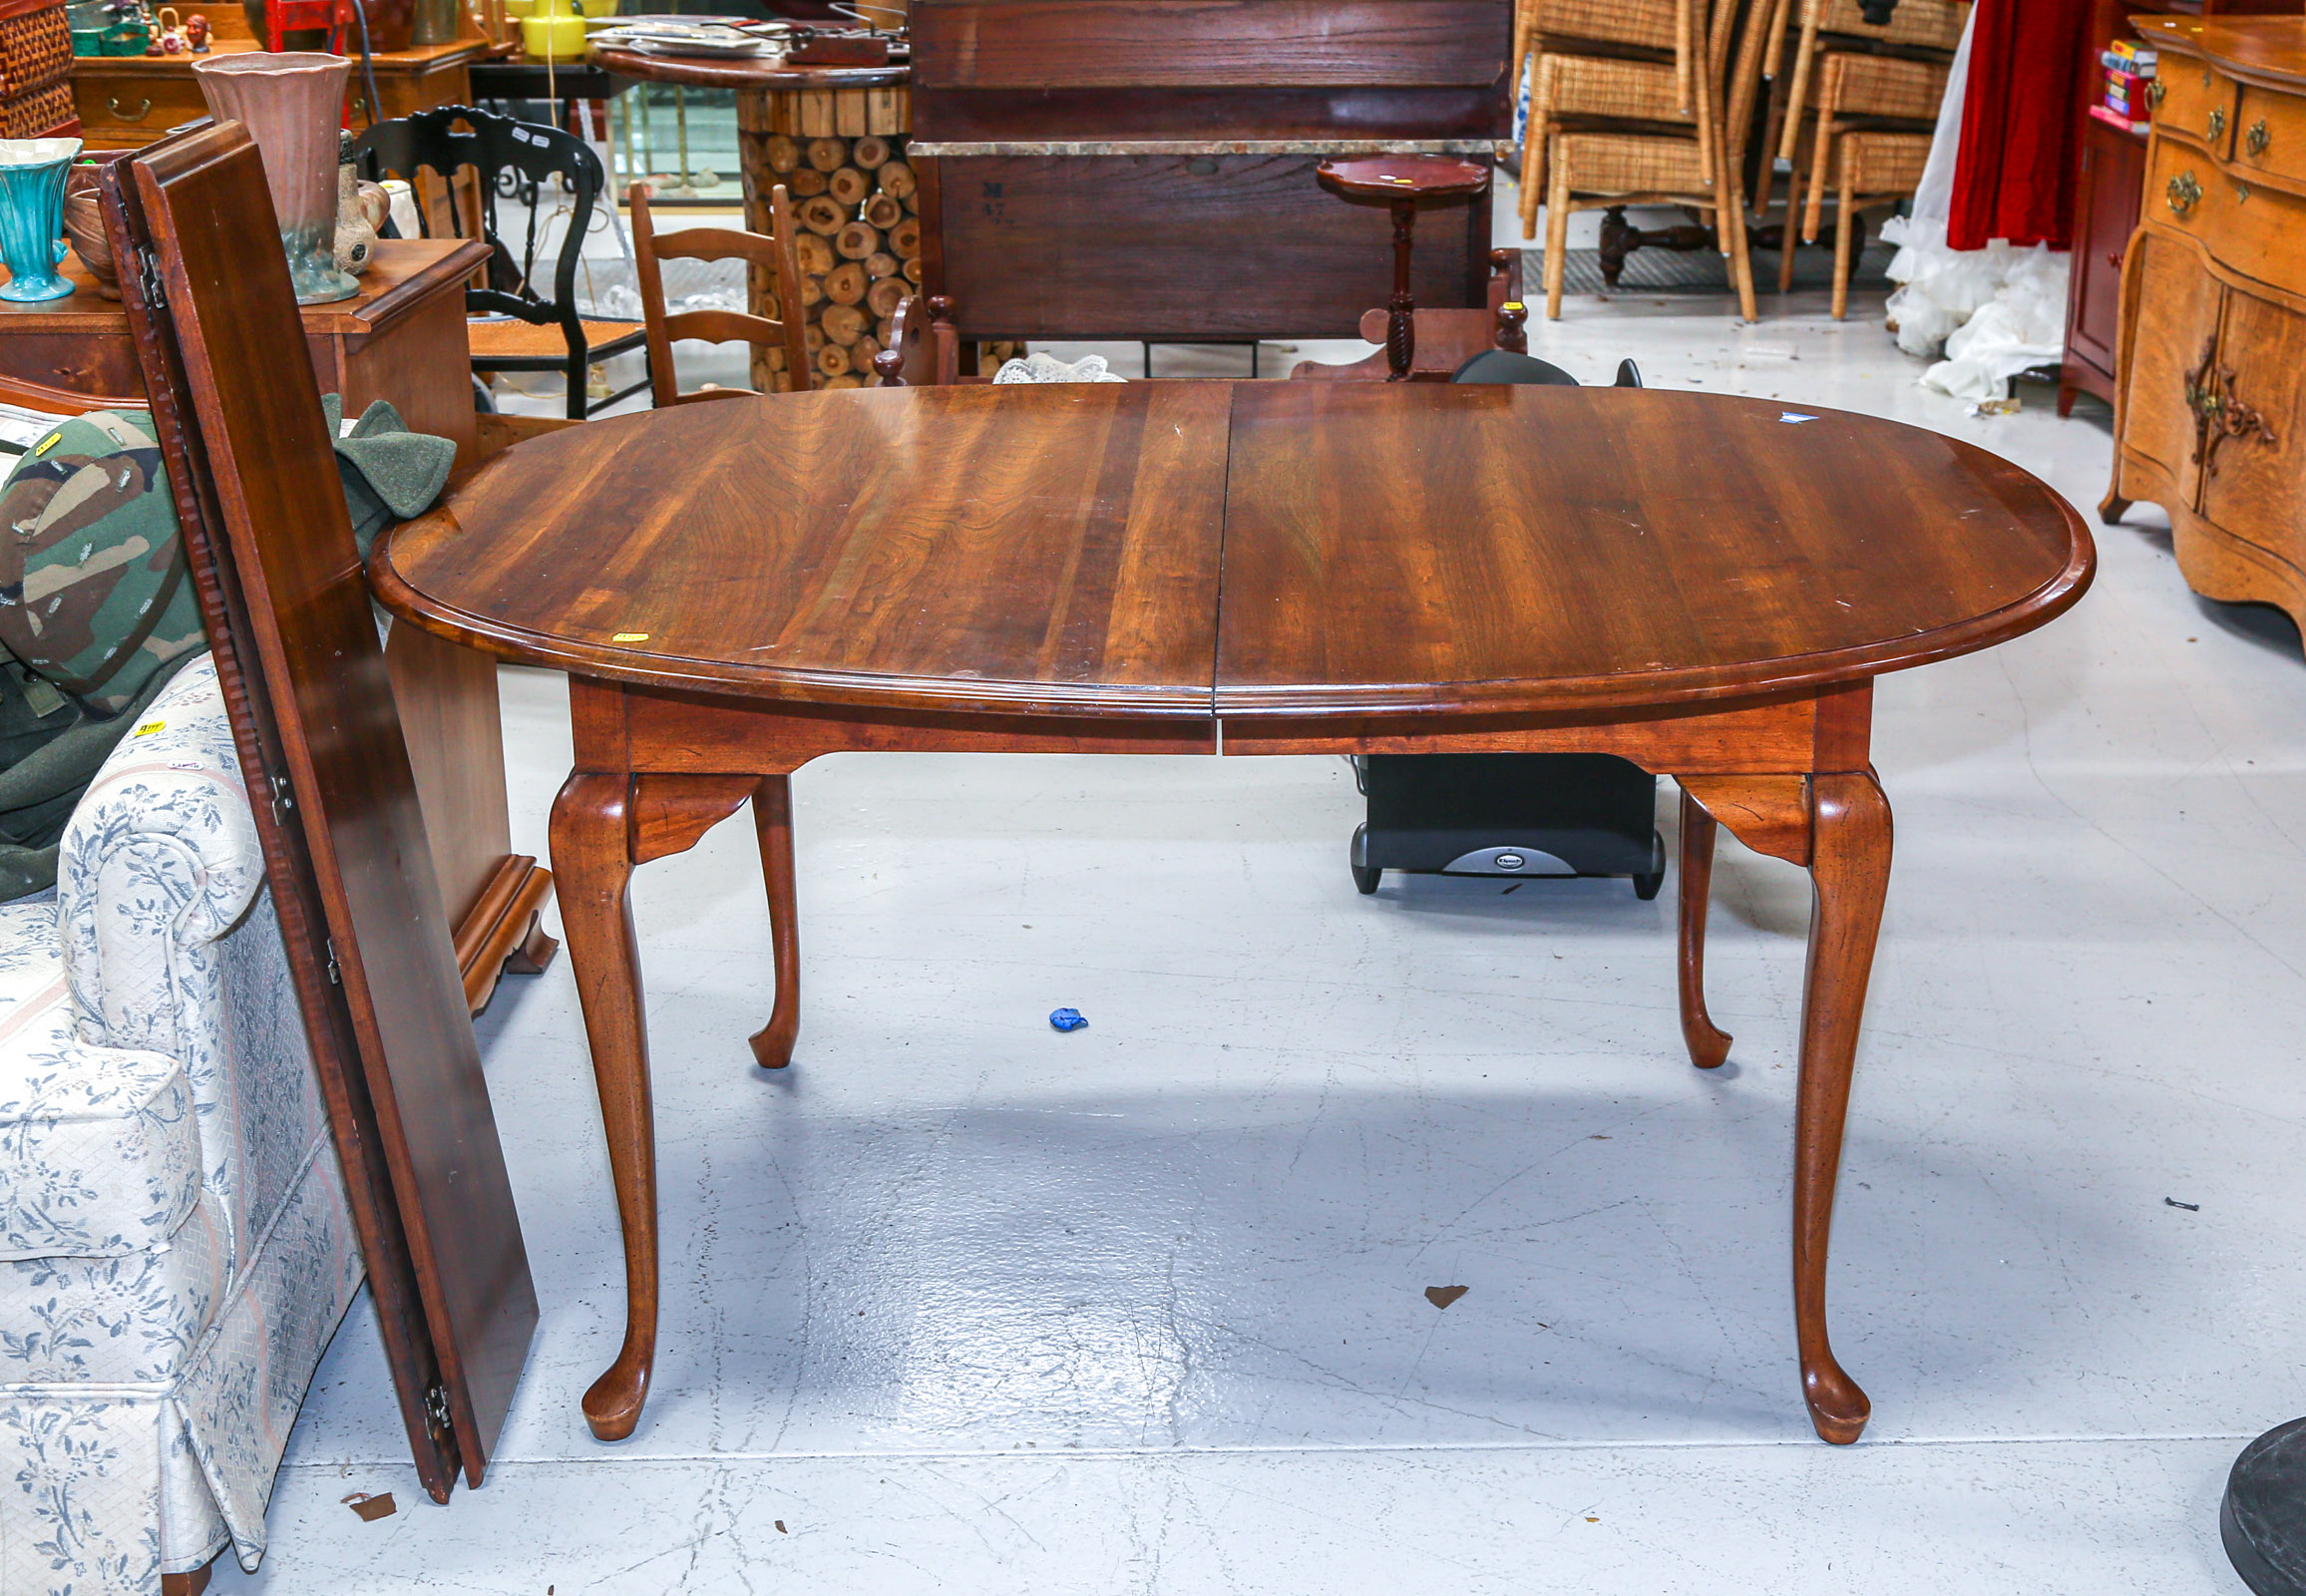 QUEEN ANNE STYLE DINING TABLE WITH